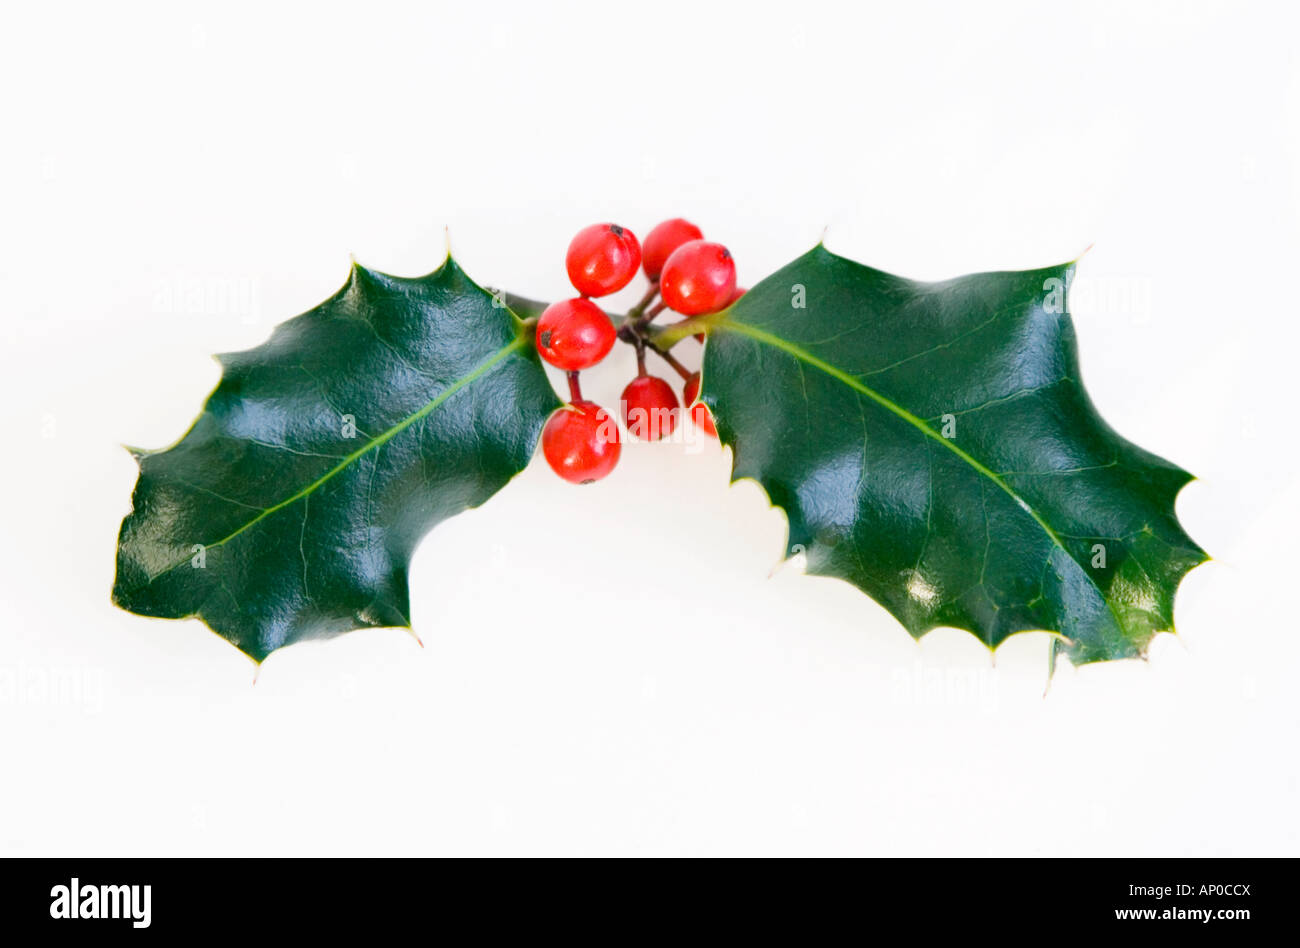 A sprig of holly leaves and red berries on white background Stock Photo